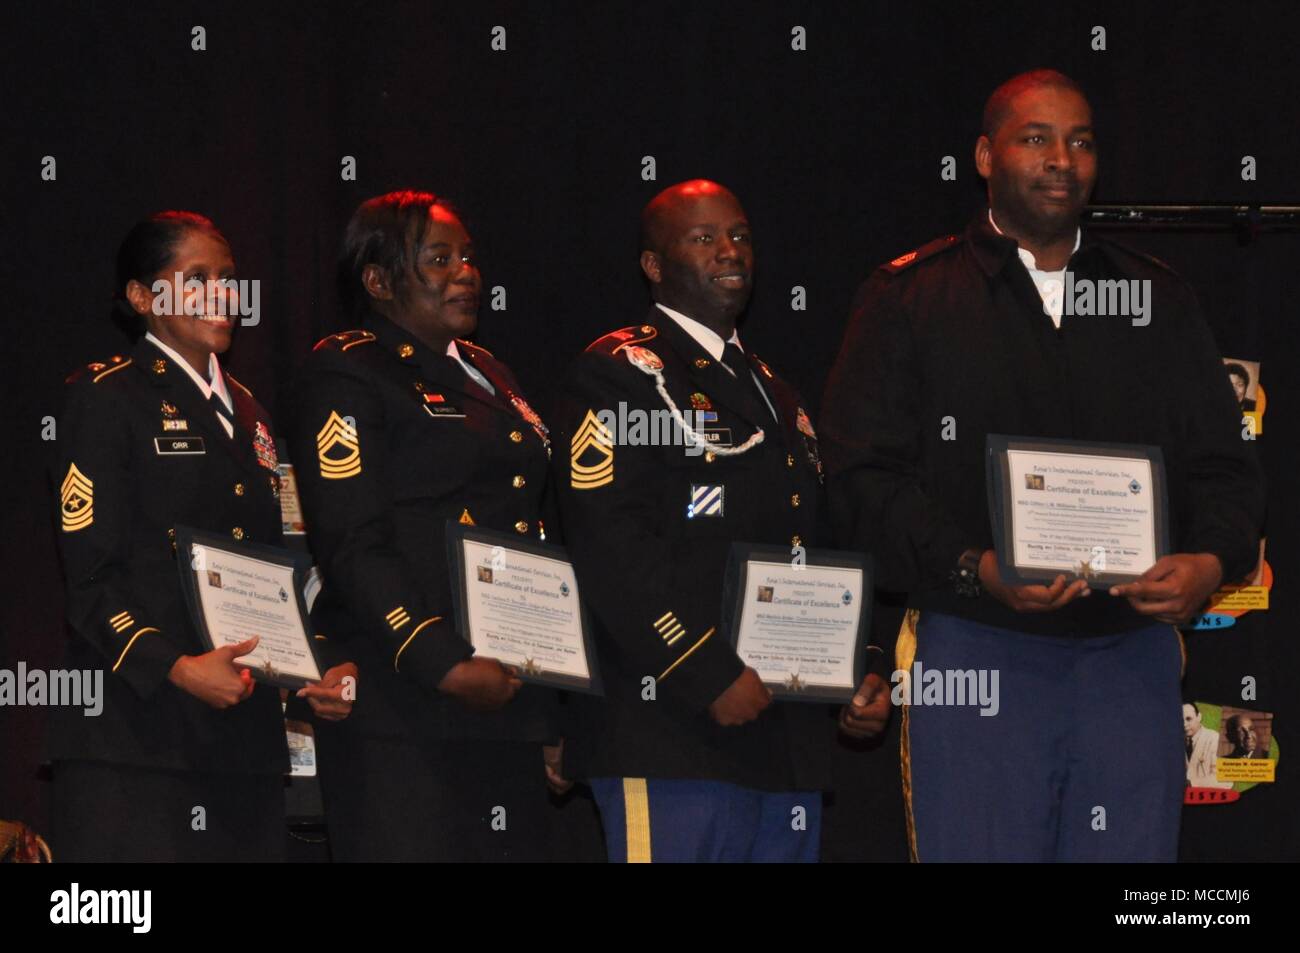 The Army Materiel Command’s Master Sgt. Clifton Williams, far right, is recognized during the 16th annual Black History Enrichment and Enlightenment Festival for his efforts to include an arts educational program as part of Redstone Arsenal’s cultural observances. Other Soldiers recognized at the Feb. 3 event in Huntsville, Ala., included, from left, Sgt. Maj. Willene Orr of the Army Materiel Command; Master Sgt. Carolyn Burnett of the Army Contracting Command and Master Sgt. Martinis Butler of the Space and Missile Defense Command/Army Forces Strategic Command. Stock Photo